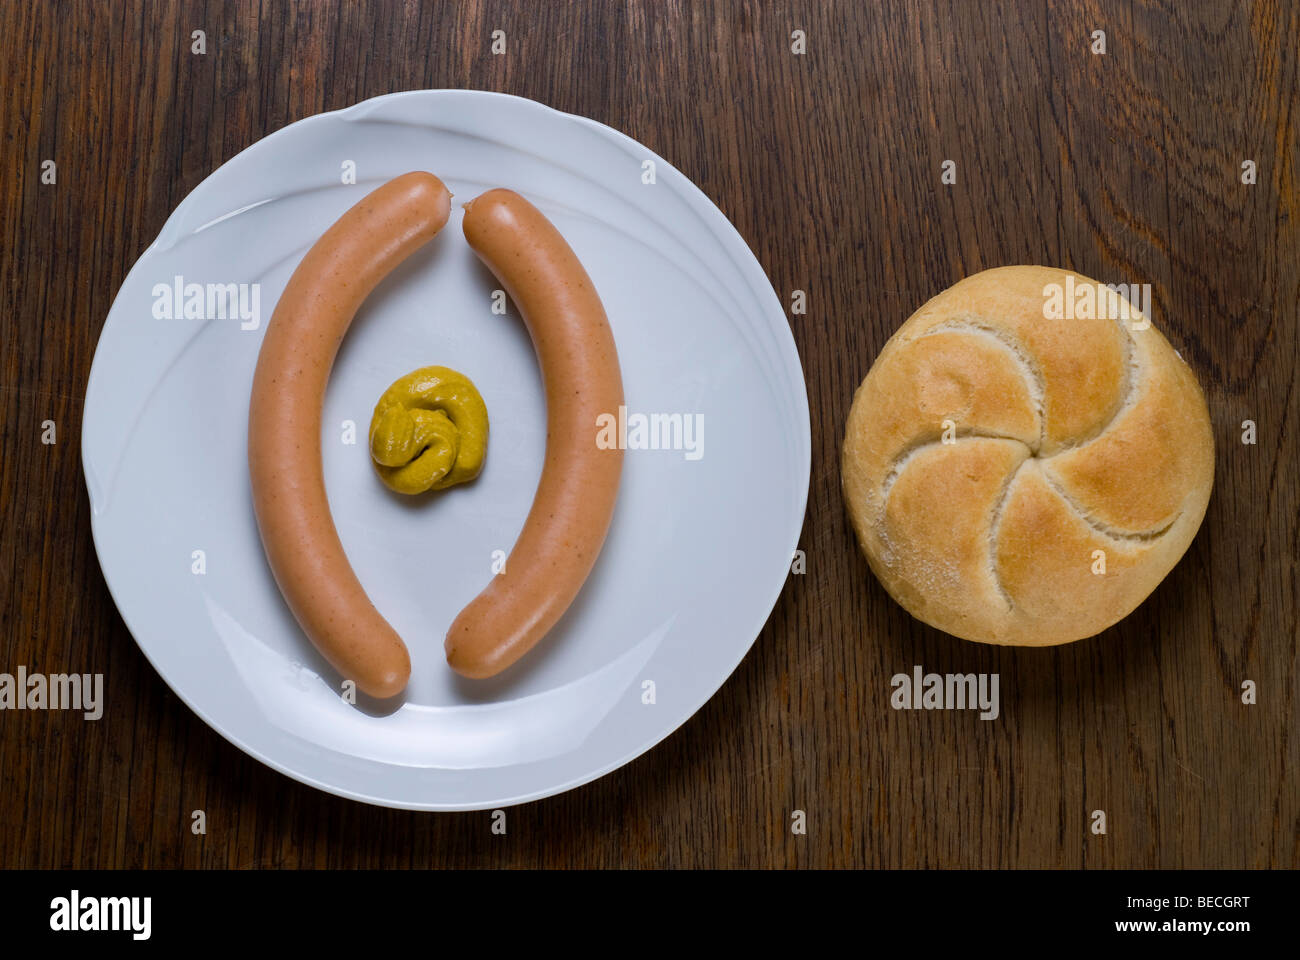 Wiener sausages with Semmel roll and medium hot mustard Stock Photo